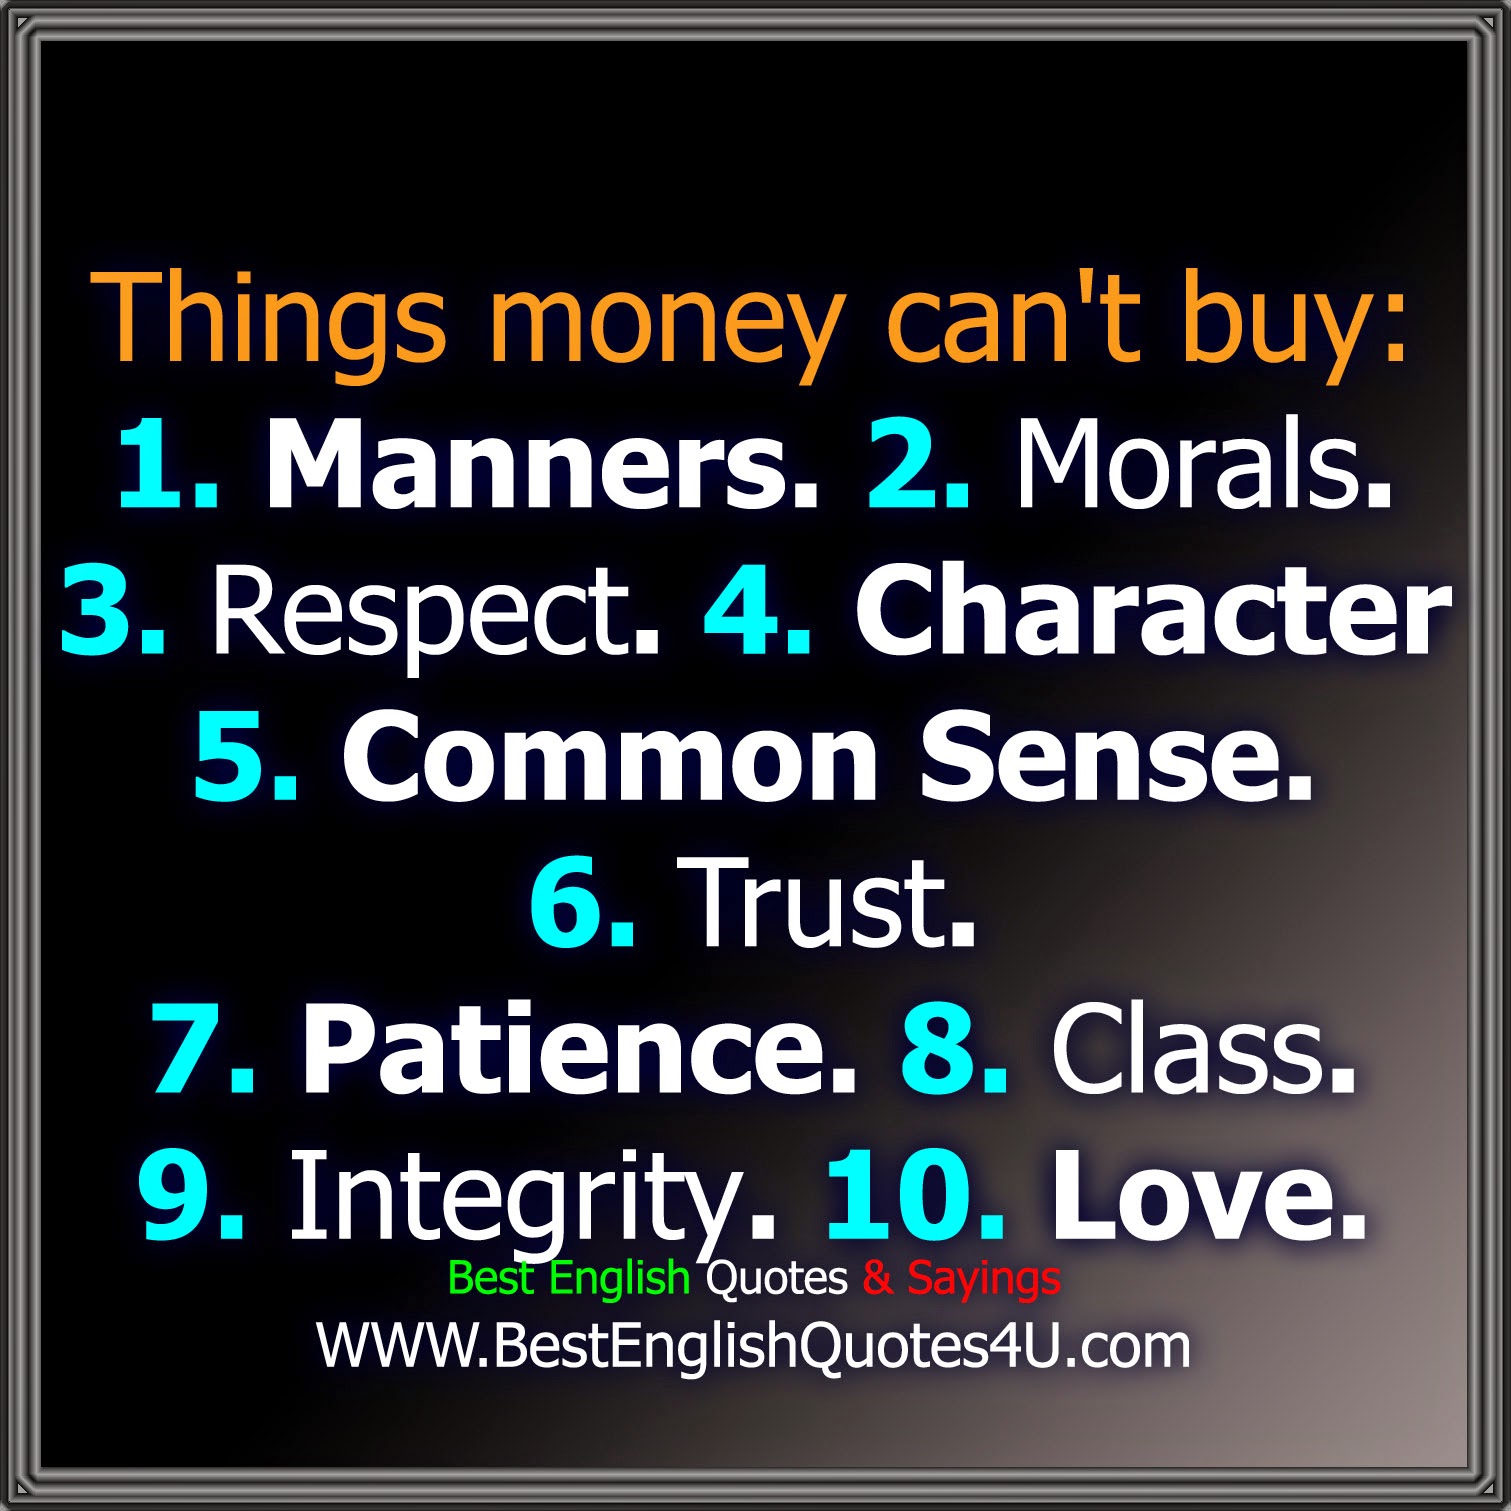 Things money can't buy: | Best English Quotes & Sayings